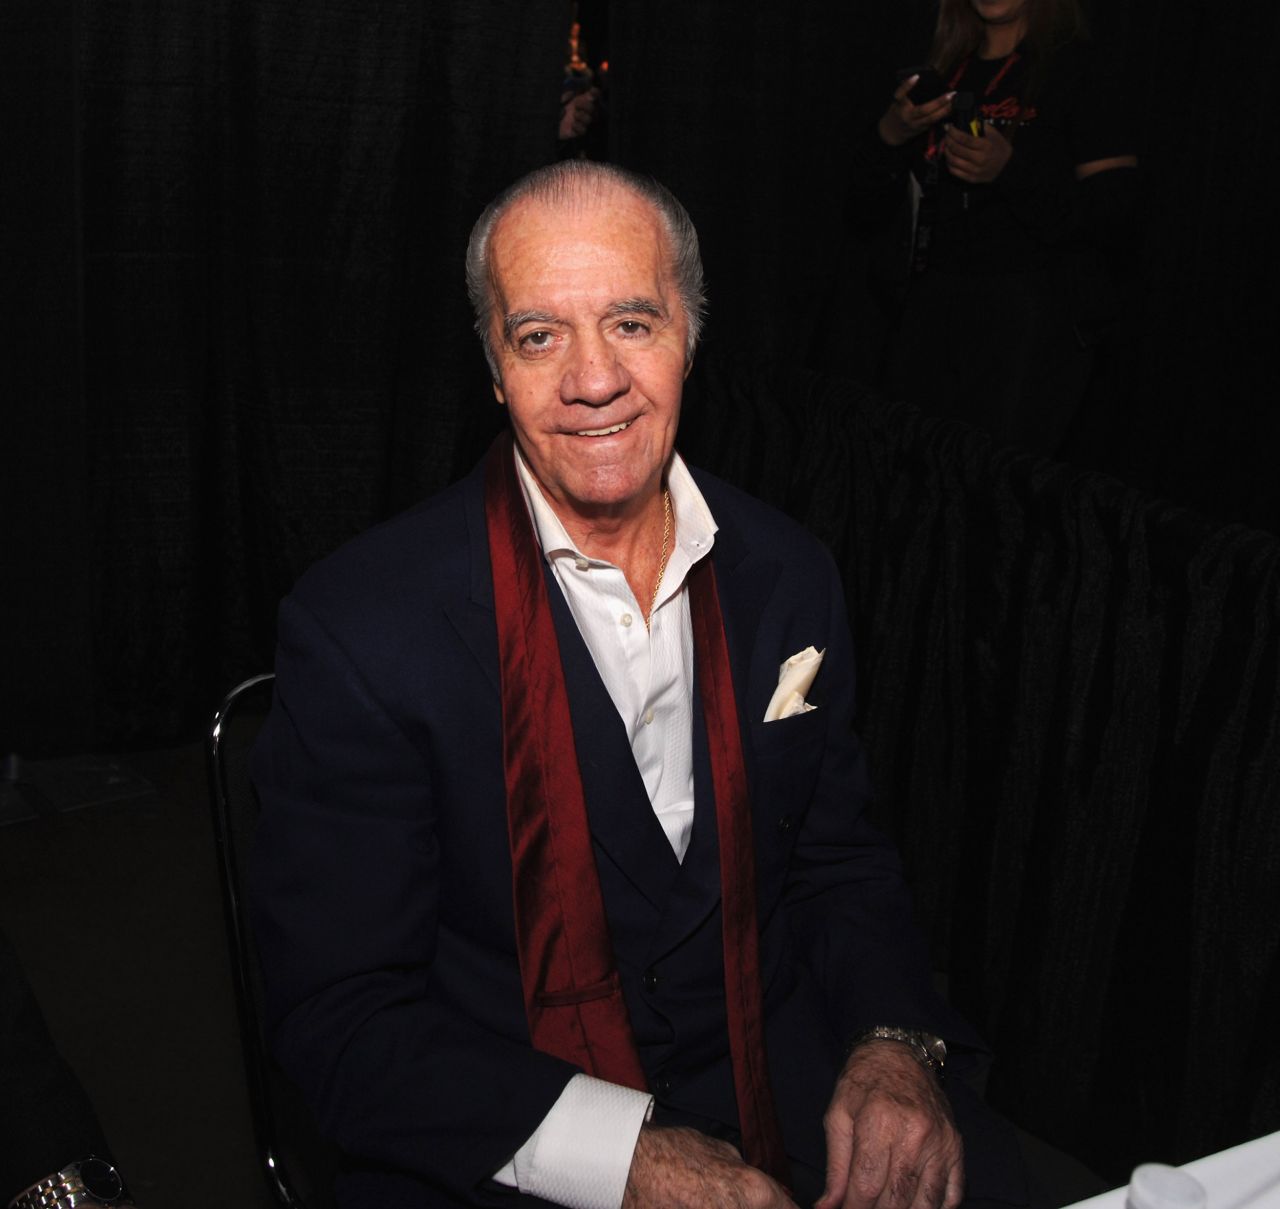 Actor Tony Sirico, best known for playing henchman Peter Paul 